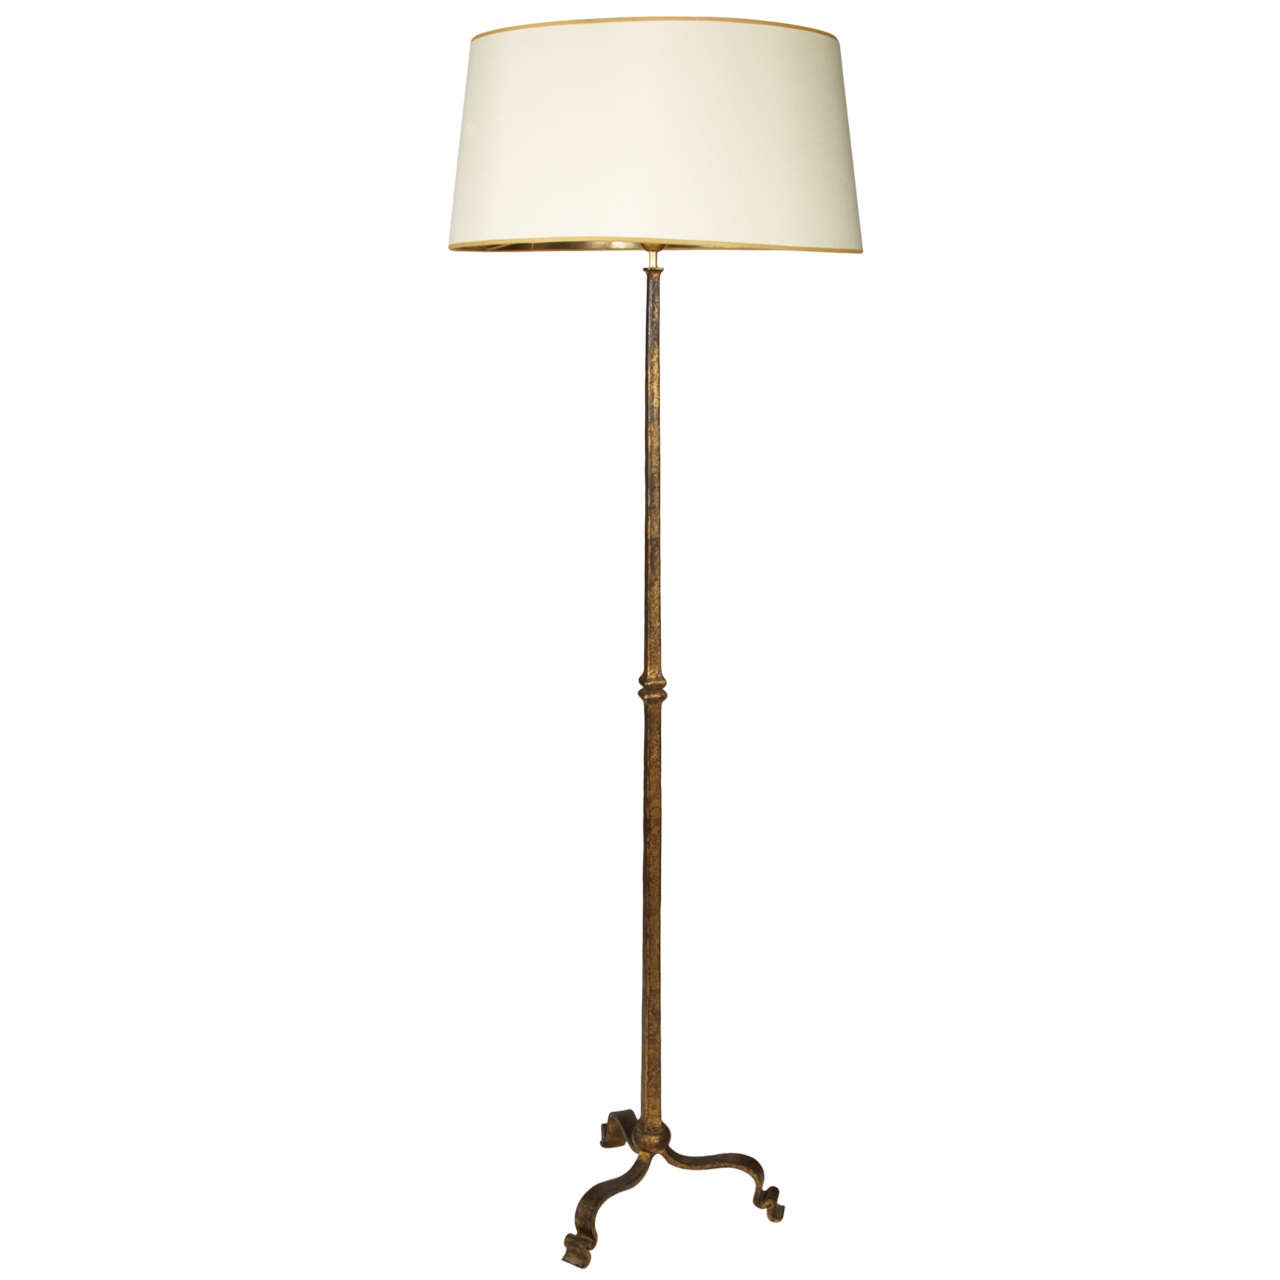 Great Floor Lamp by Maison Ramsay